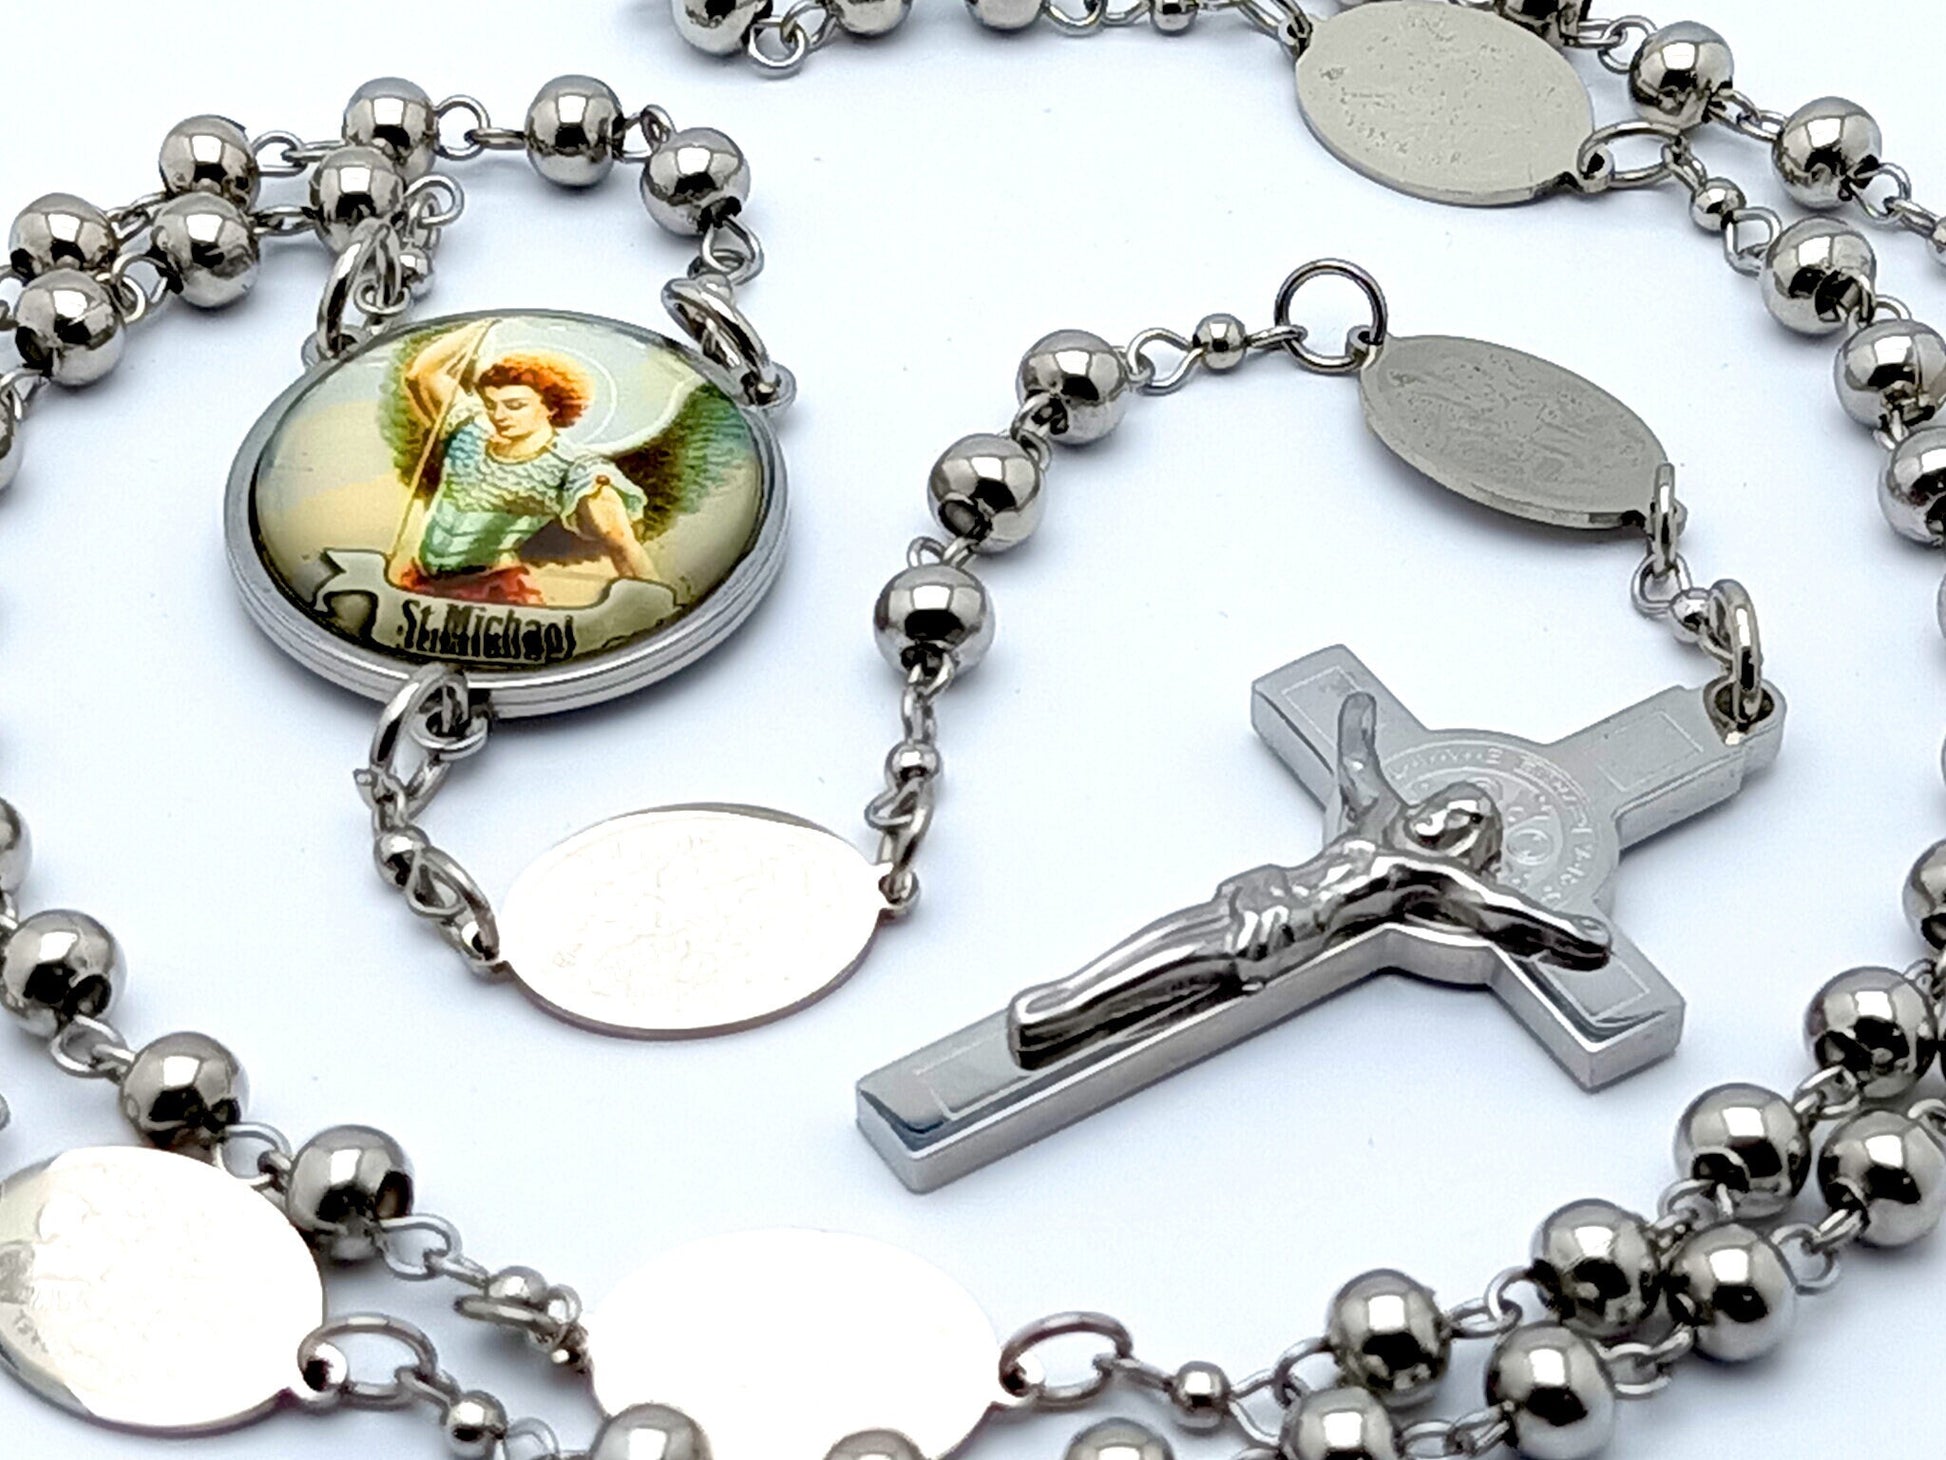 Saint Michael unique rosary beads with stainless steel beads and etched medals, stainless steel crucifix and picture centre medal.